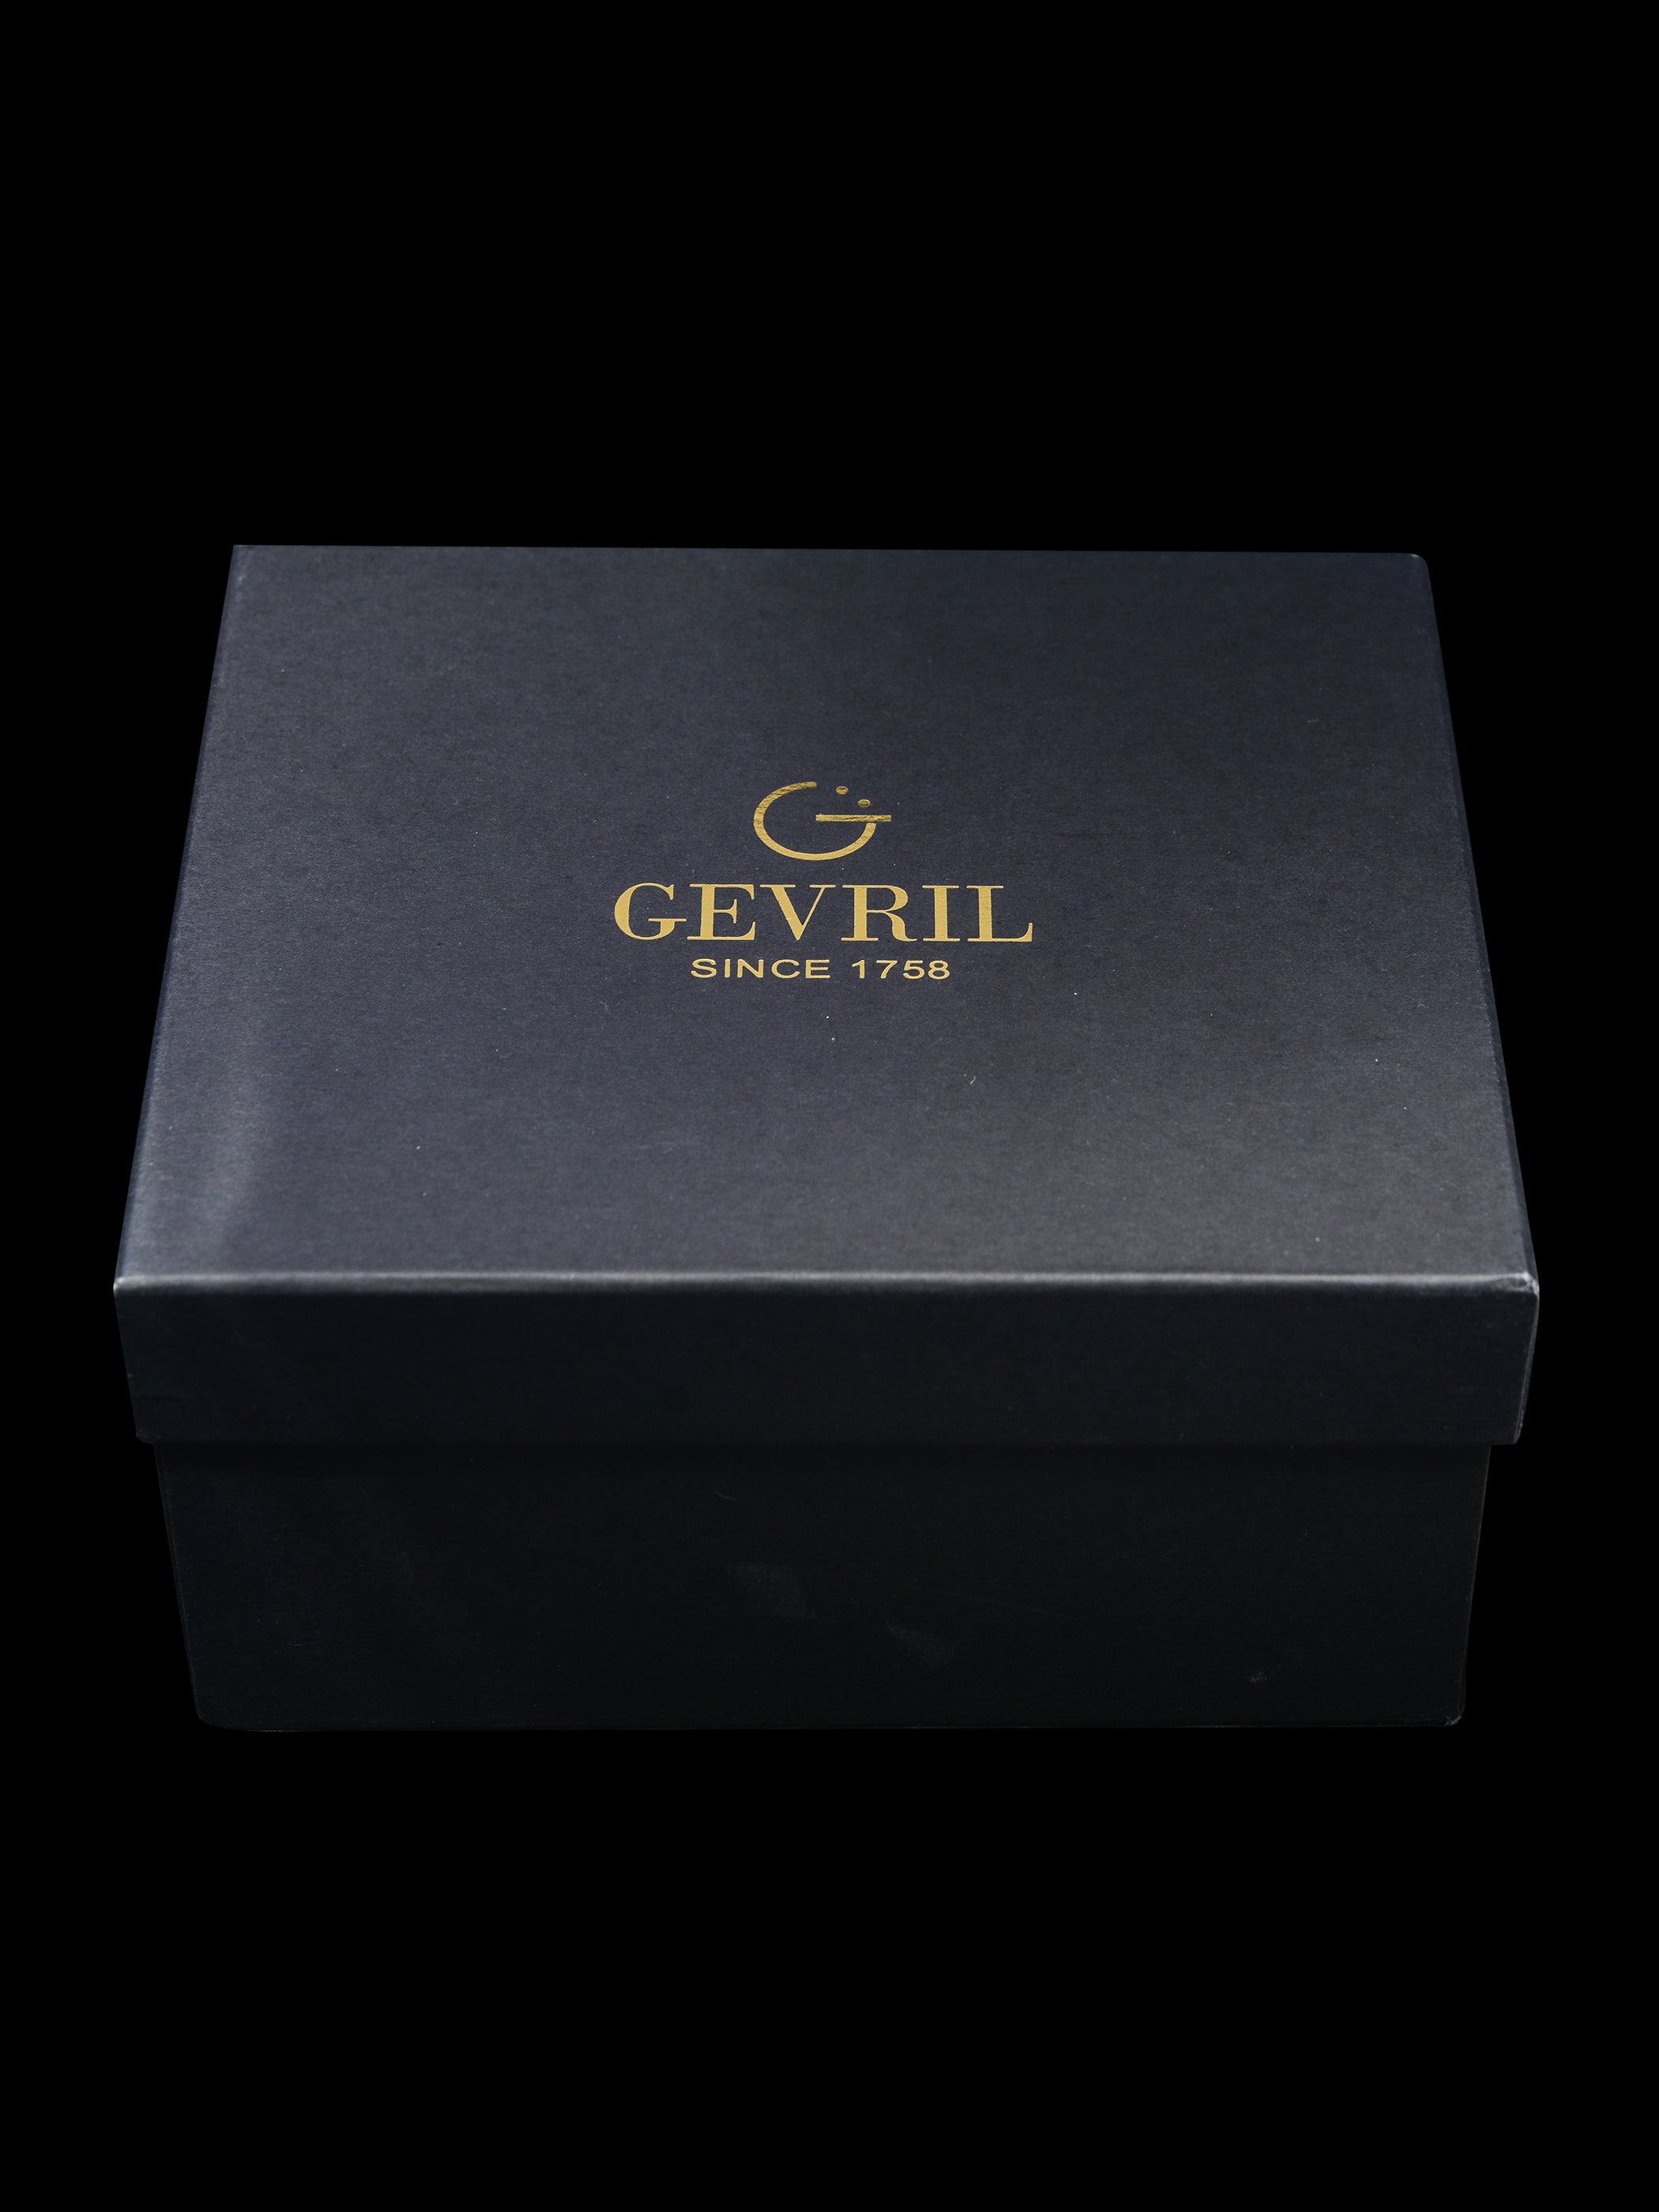 2000 Gevril Tribeca Chronograph With Box and Papers